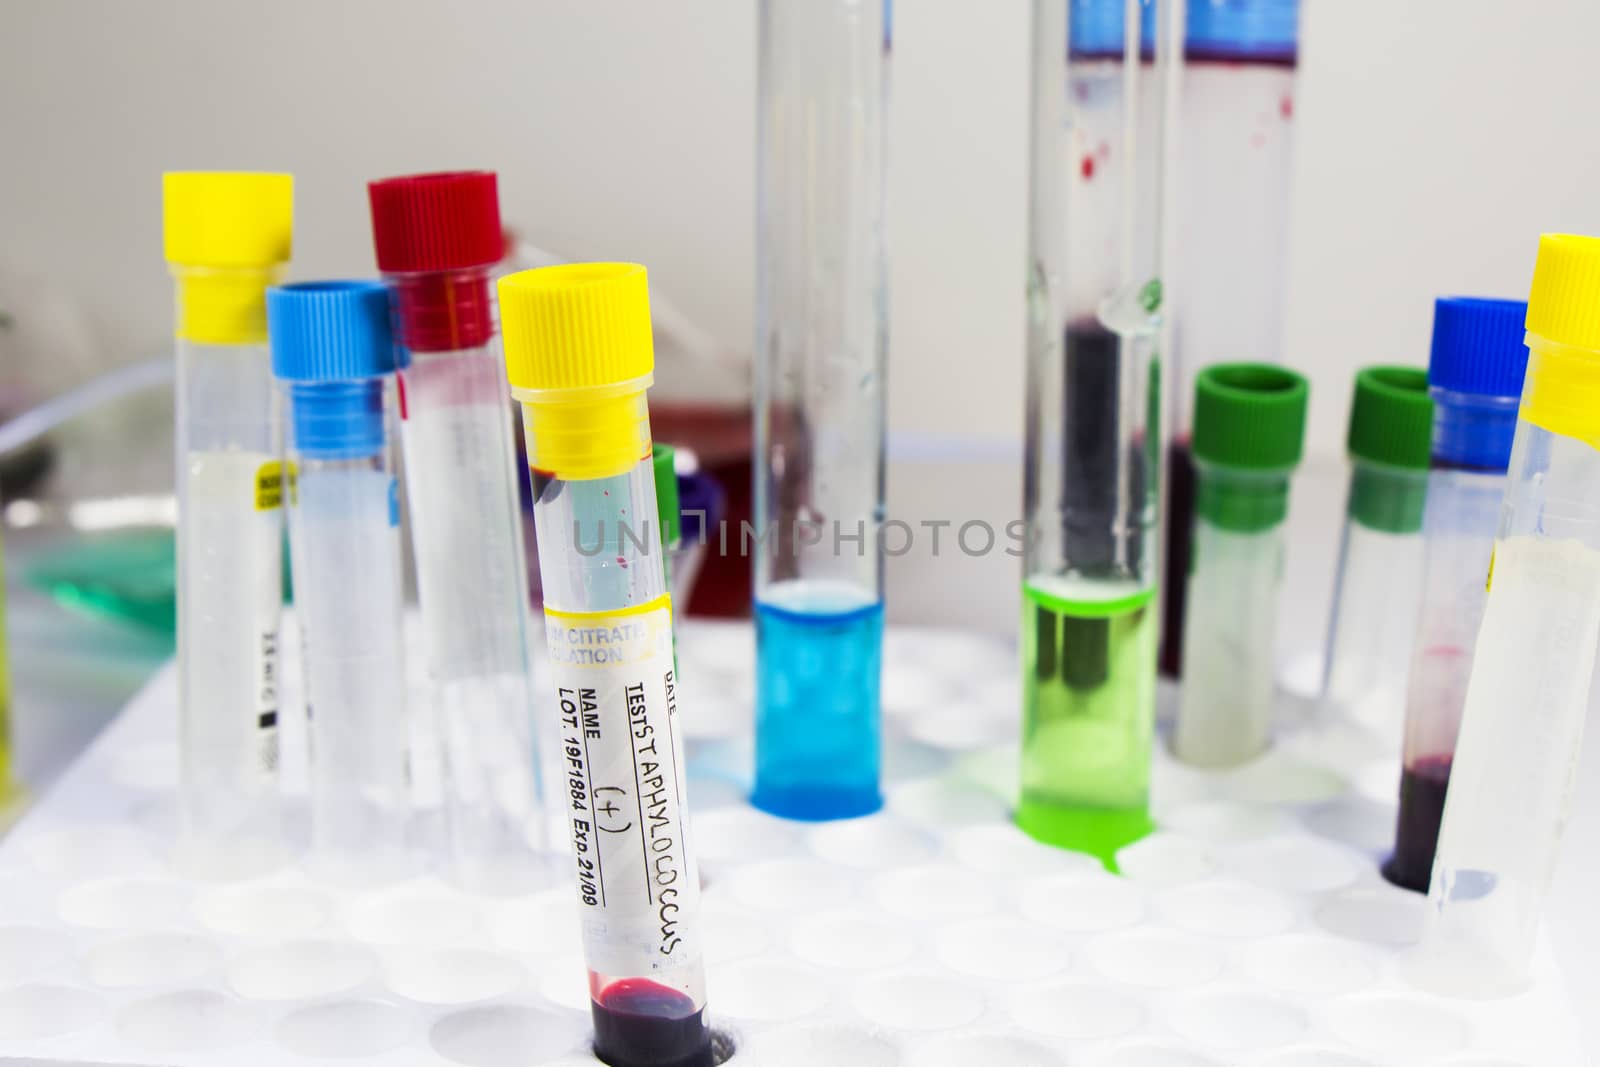 Staphylococci bacteria, blood test tube samples